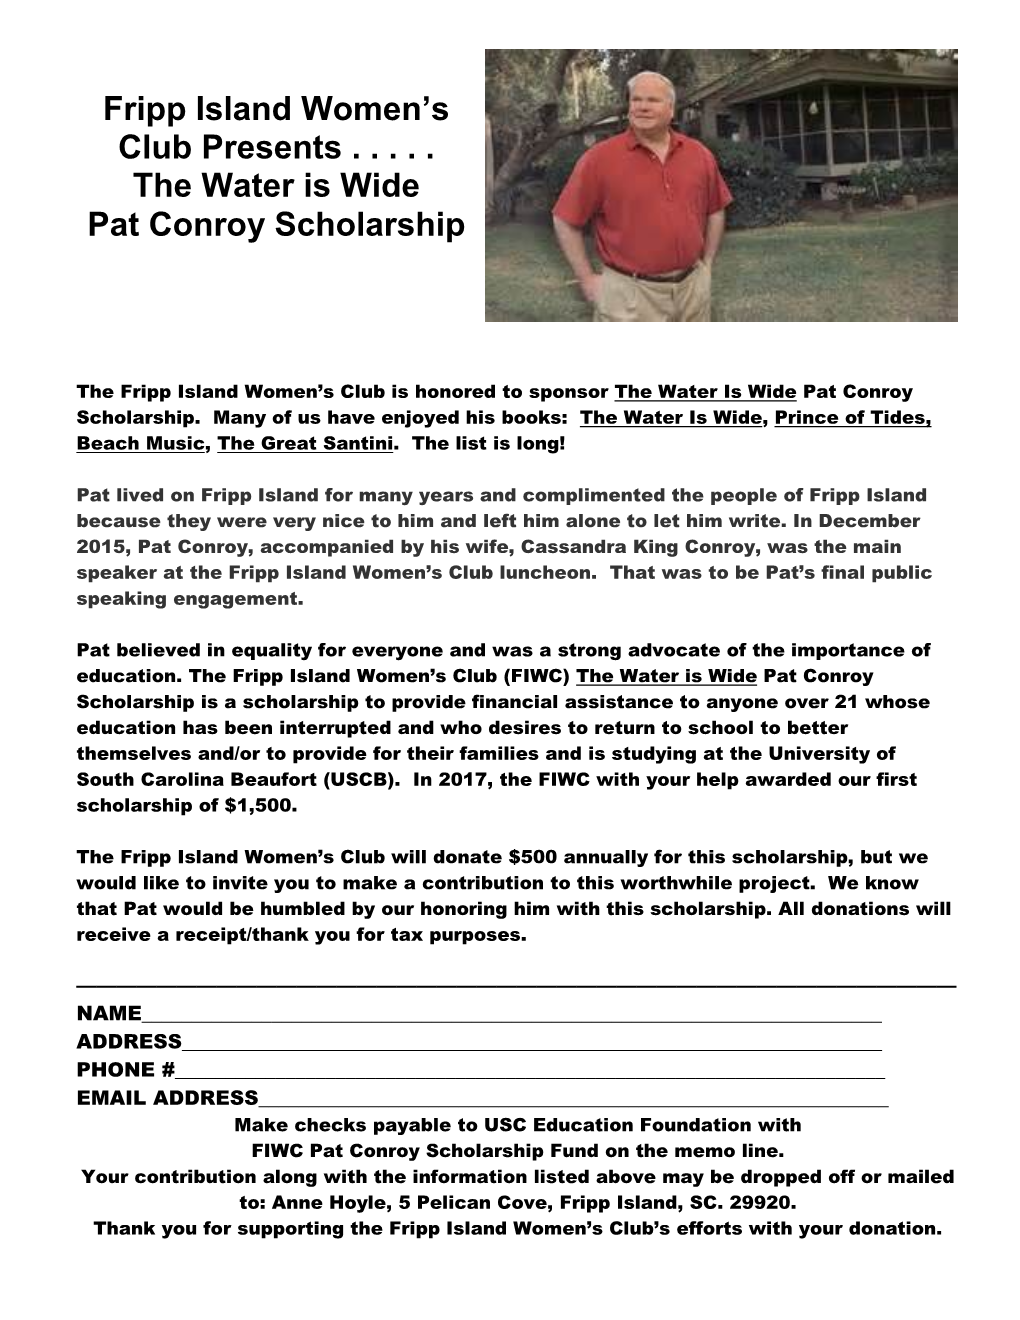 Fripp Island Women's Club Presents ...The Water Is Wide Pat Conroy Scholarship